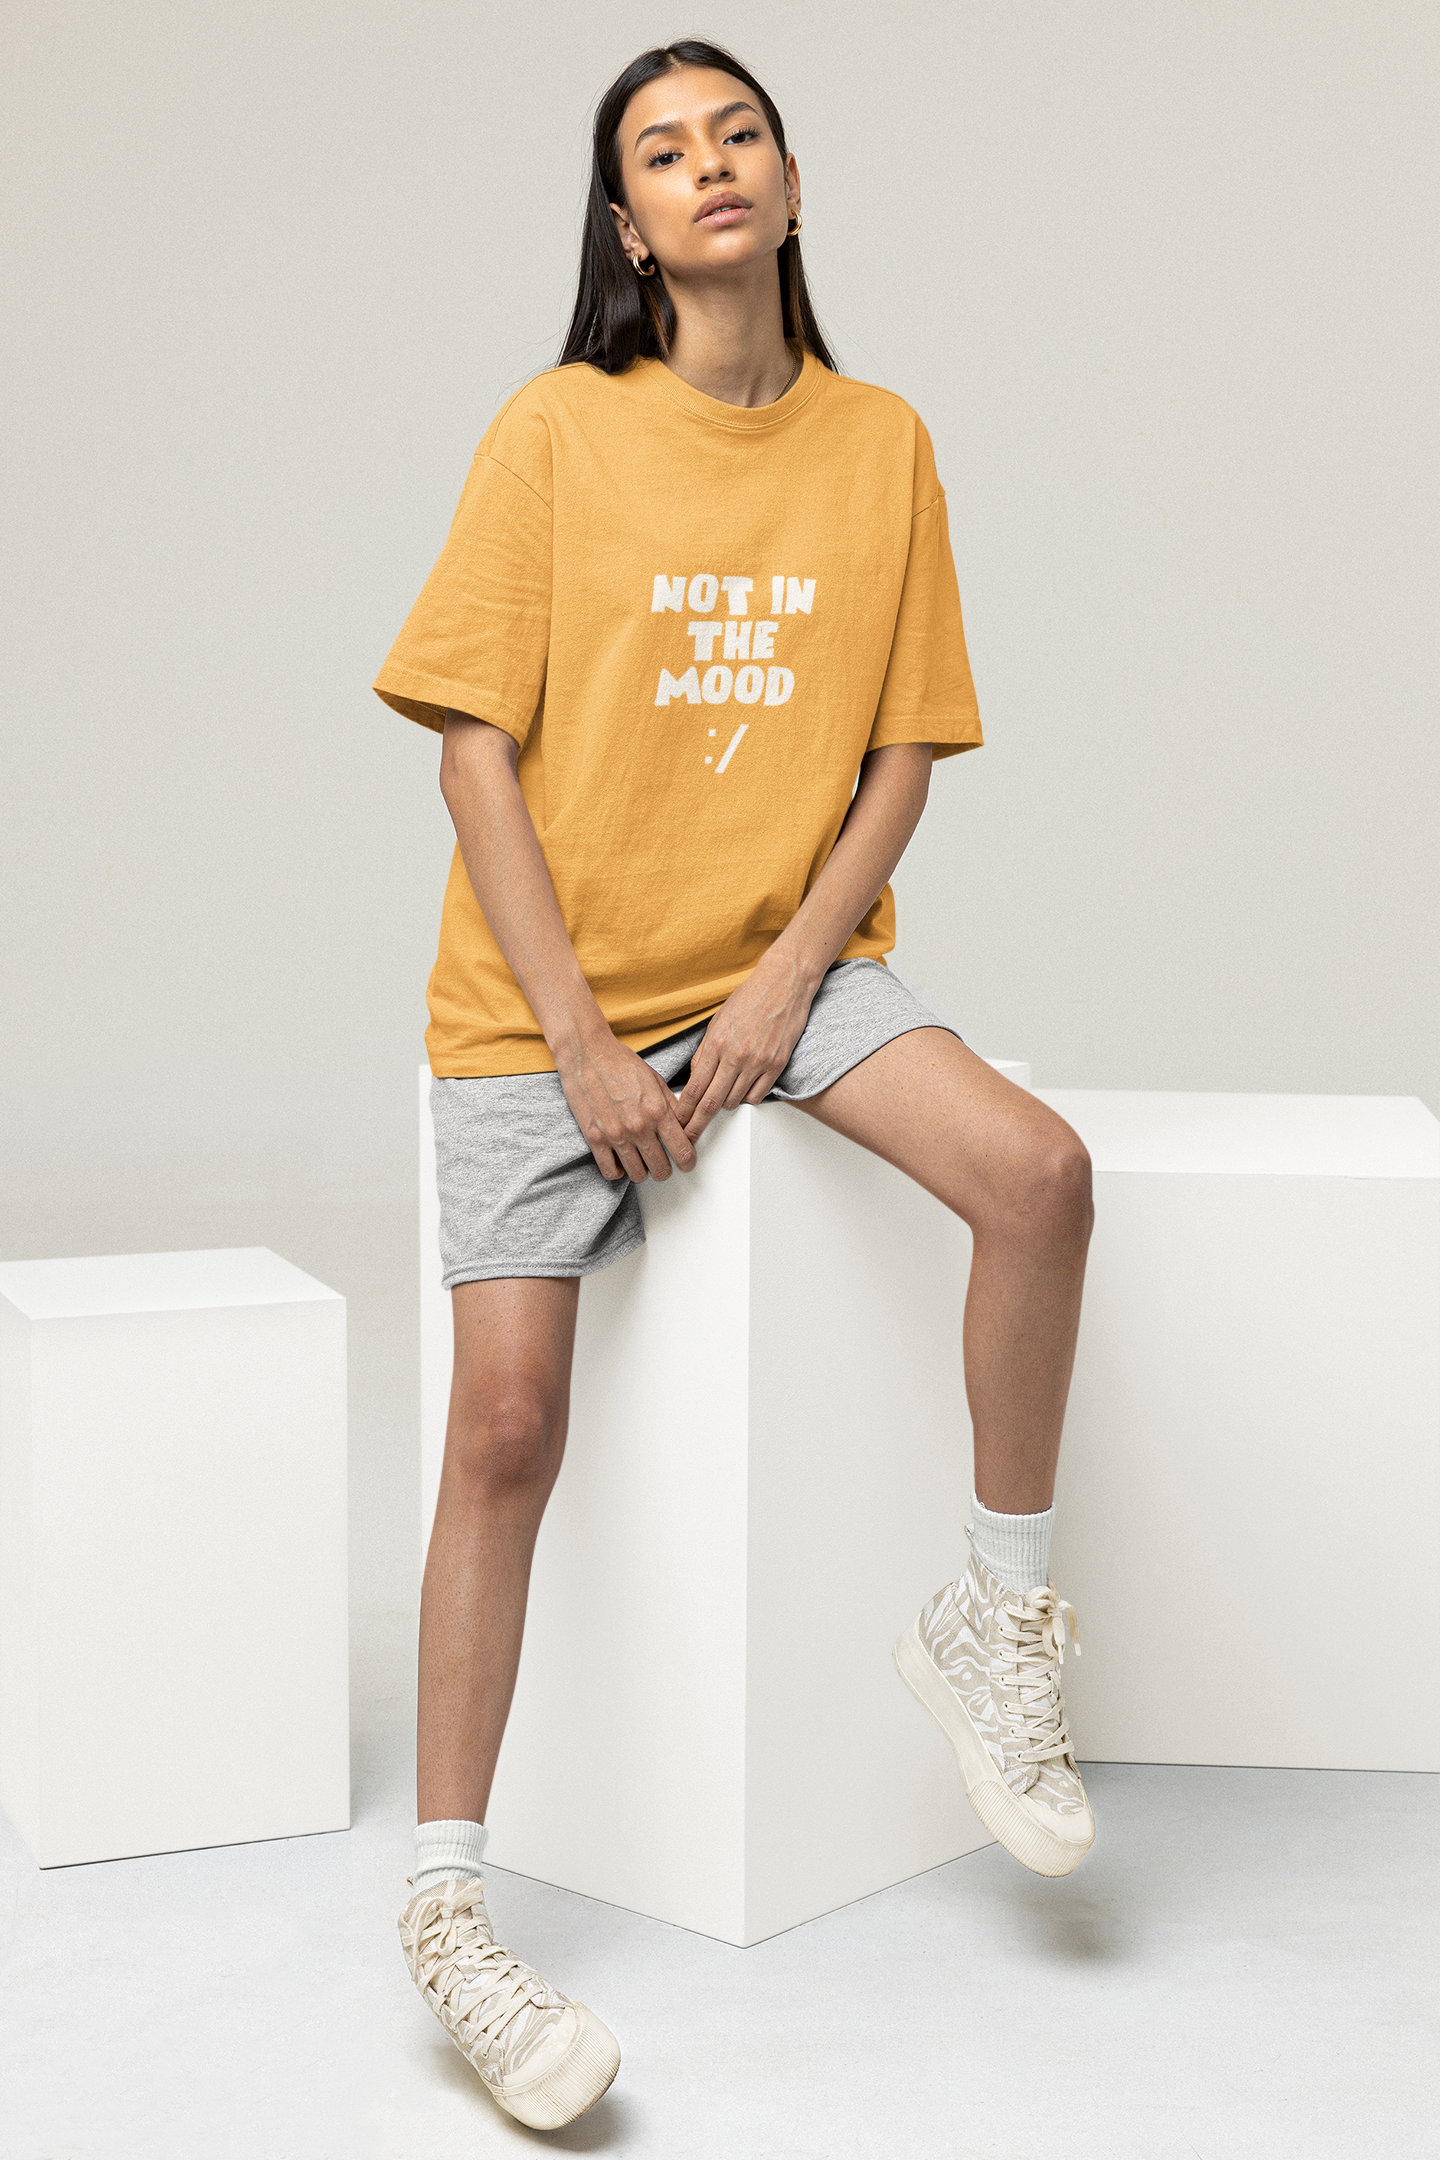 OVERSIZED TSHIRTS YELLOW: NOT IN MOOD